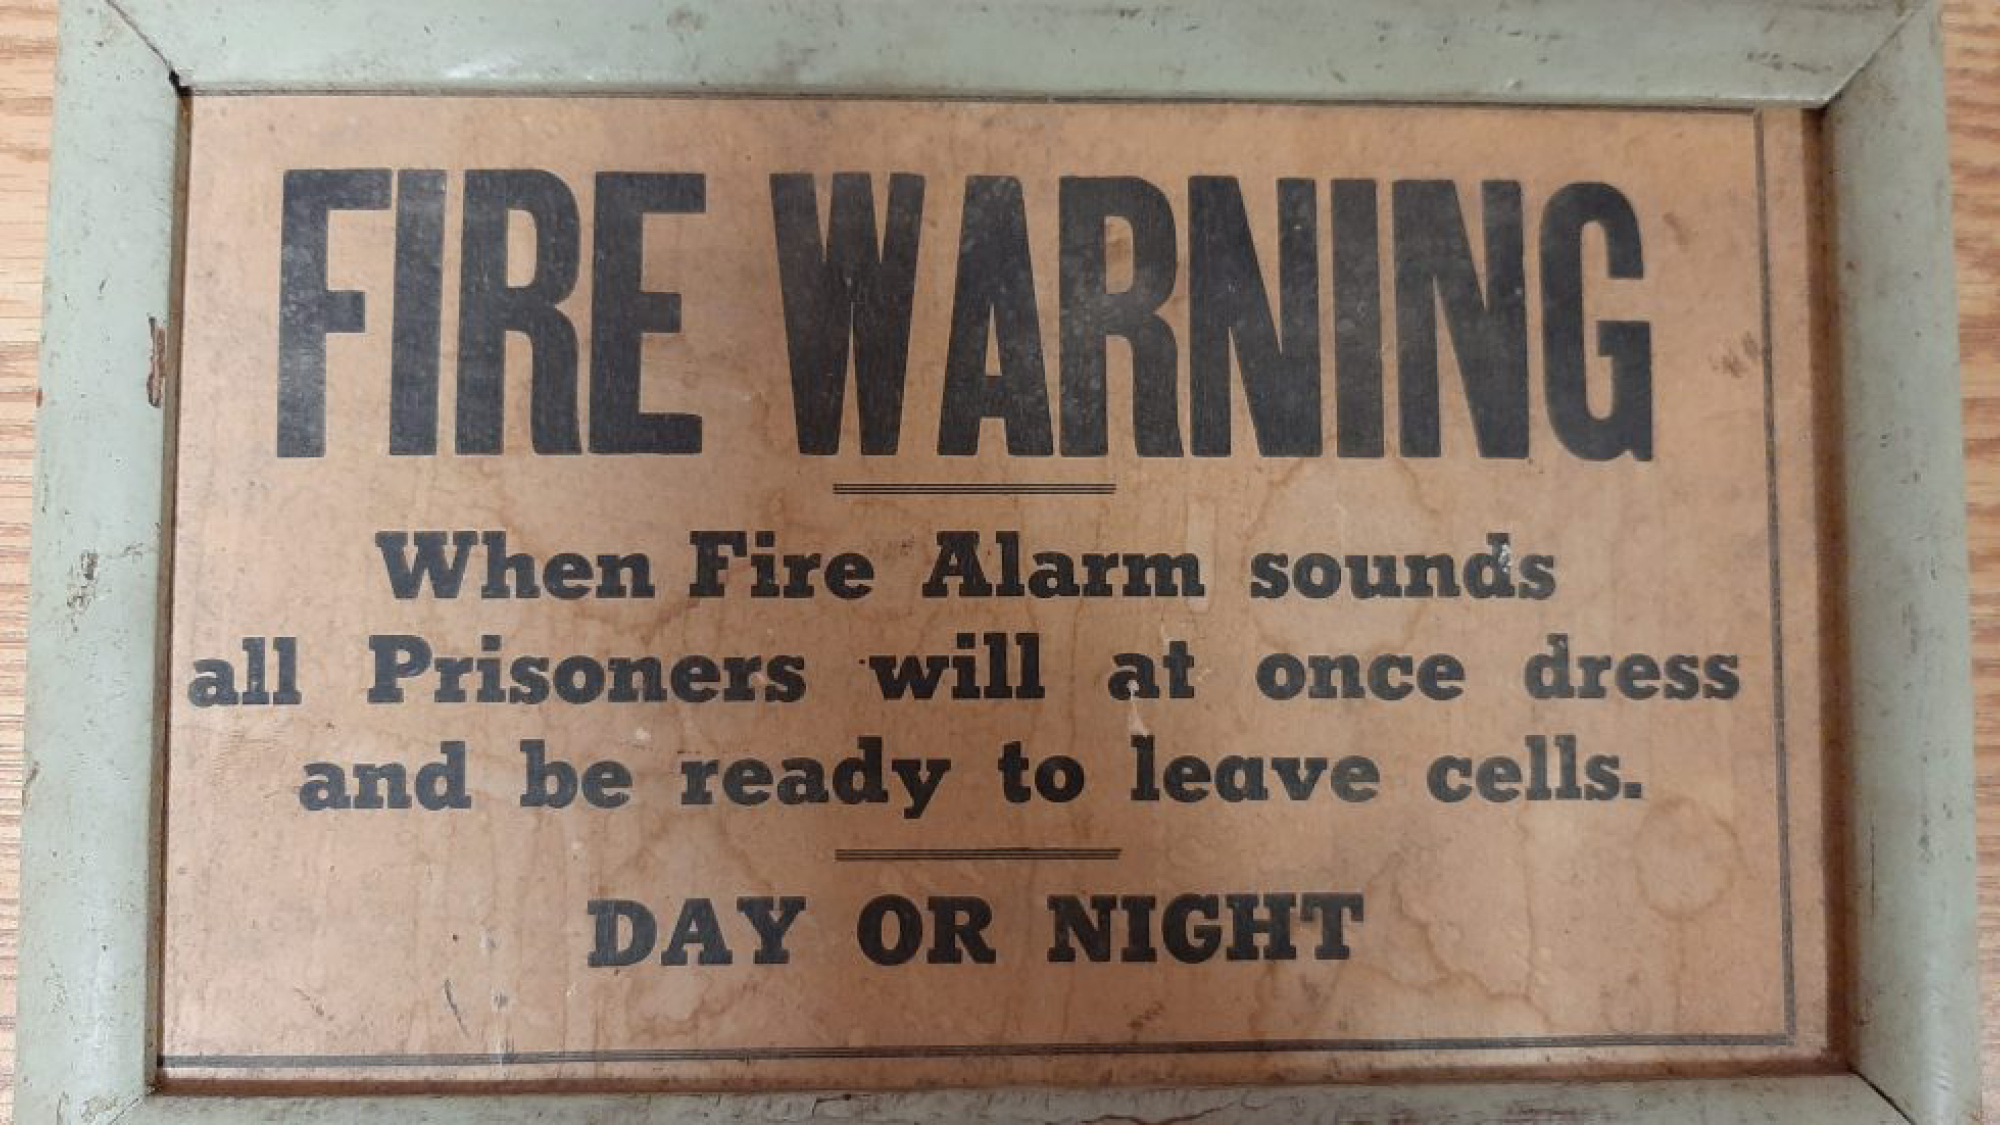 Wooden sign with black text: "Fire Warning: When Fire Alarm sounds Prisoners will at once dress and be ready to leave cells. DAY OR NIGHT."